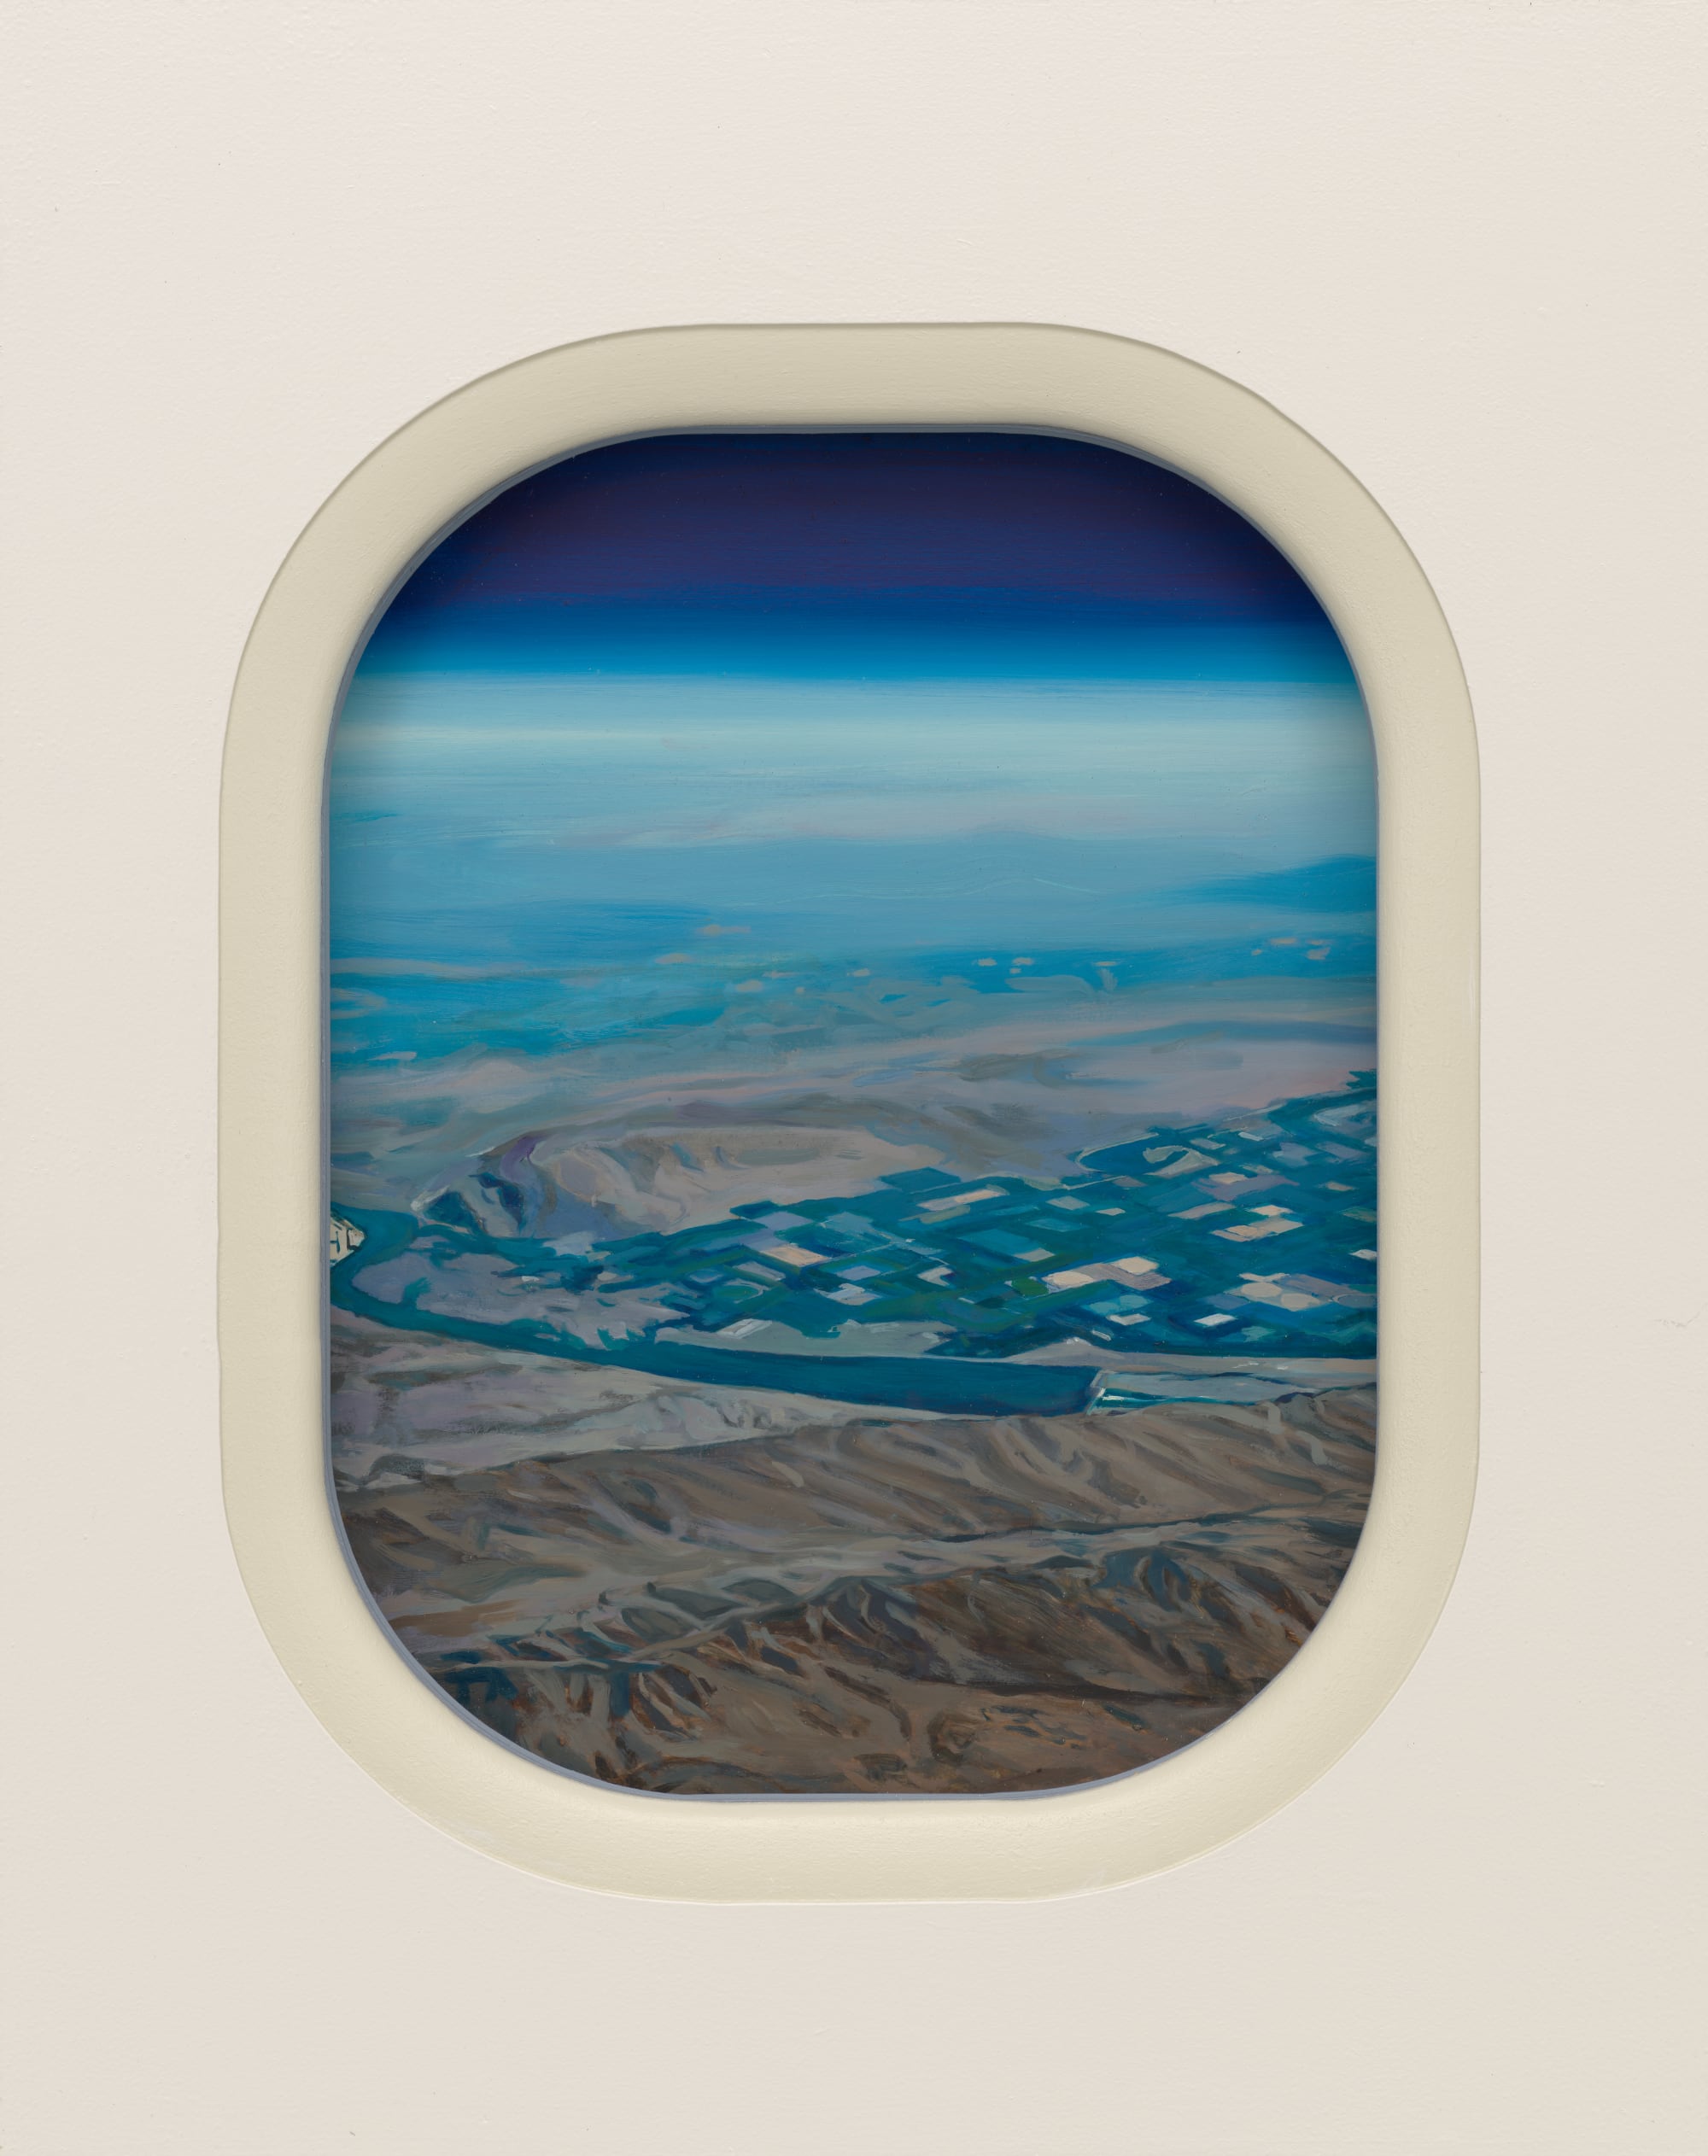 a desert and mountain landscape painting through an airplane-like window